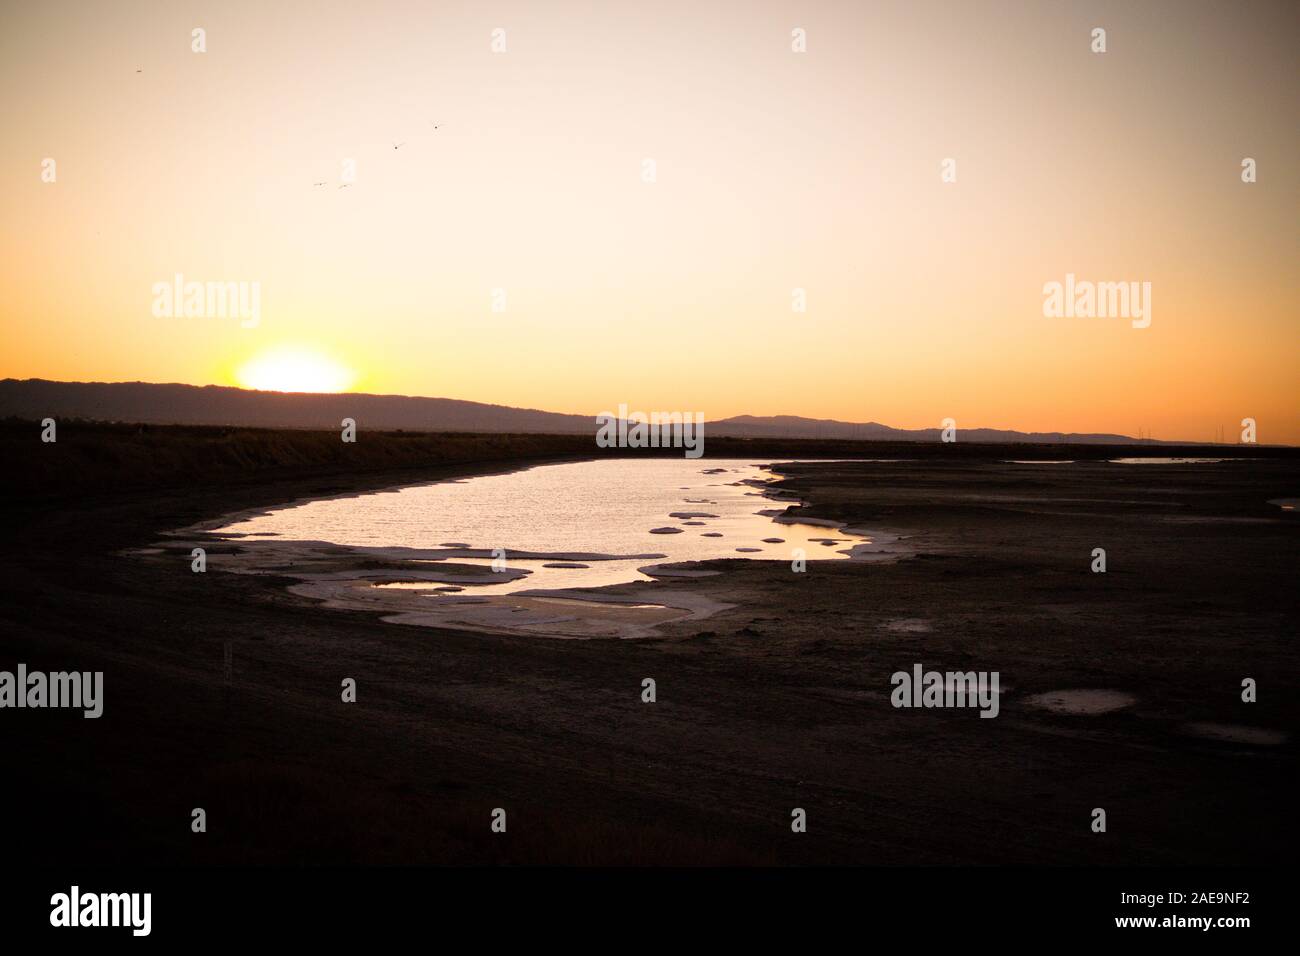 Sun setting behind mountain, with tidal marsh / salt pan on the edge of San Fransisco Bay in the foreground. Orange sky, black ground. Stock Photo